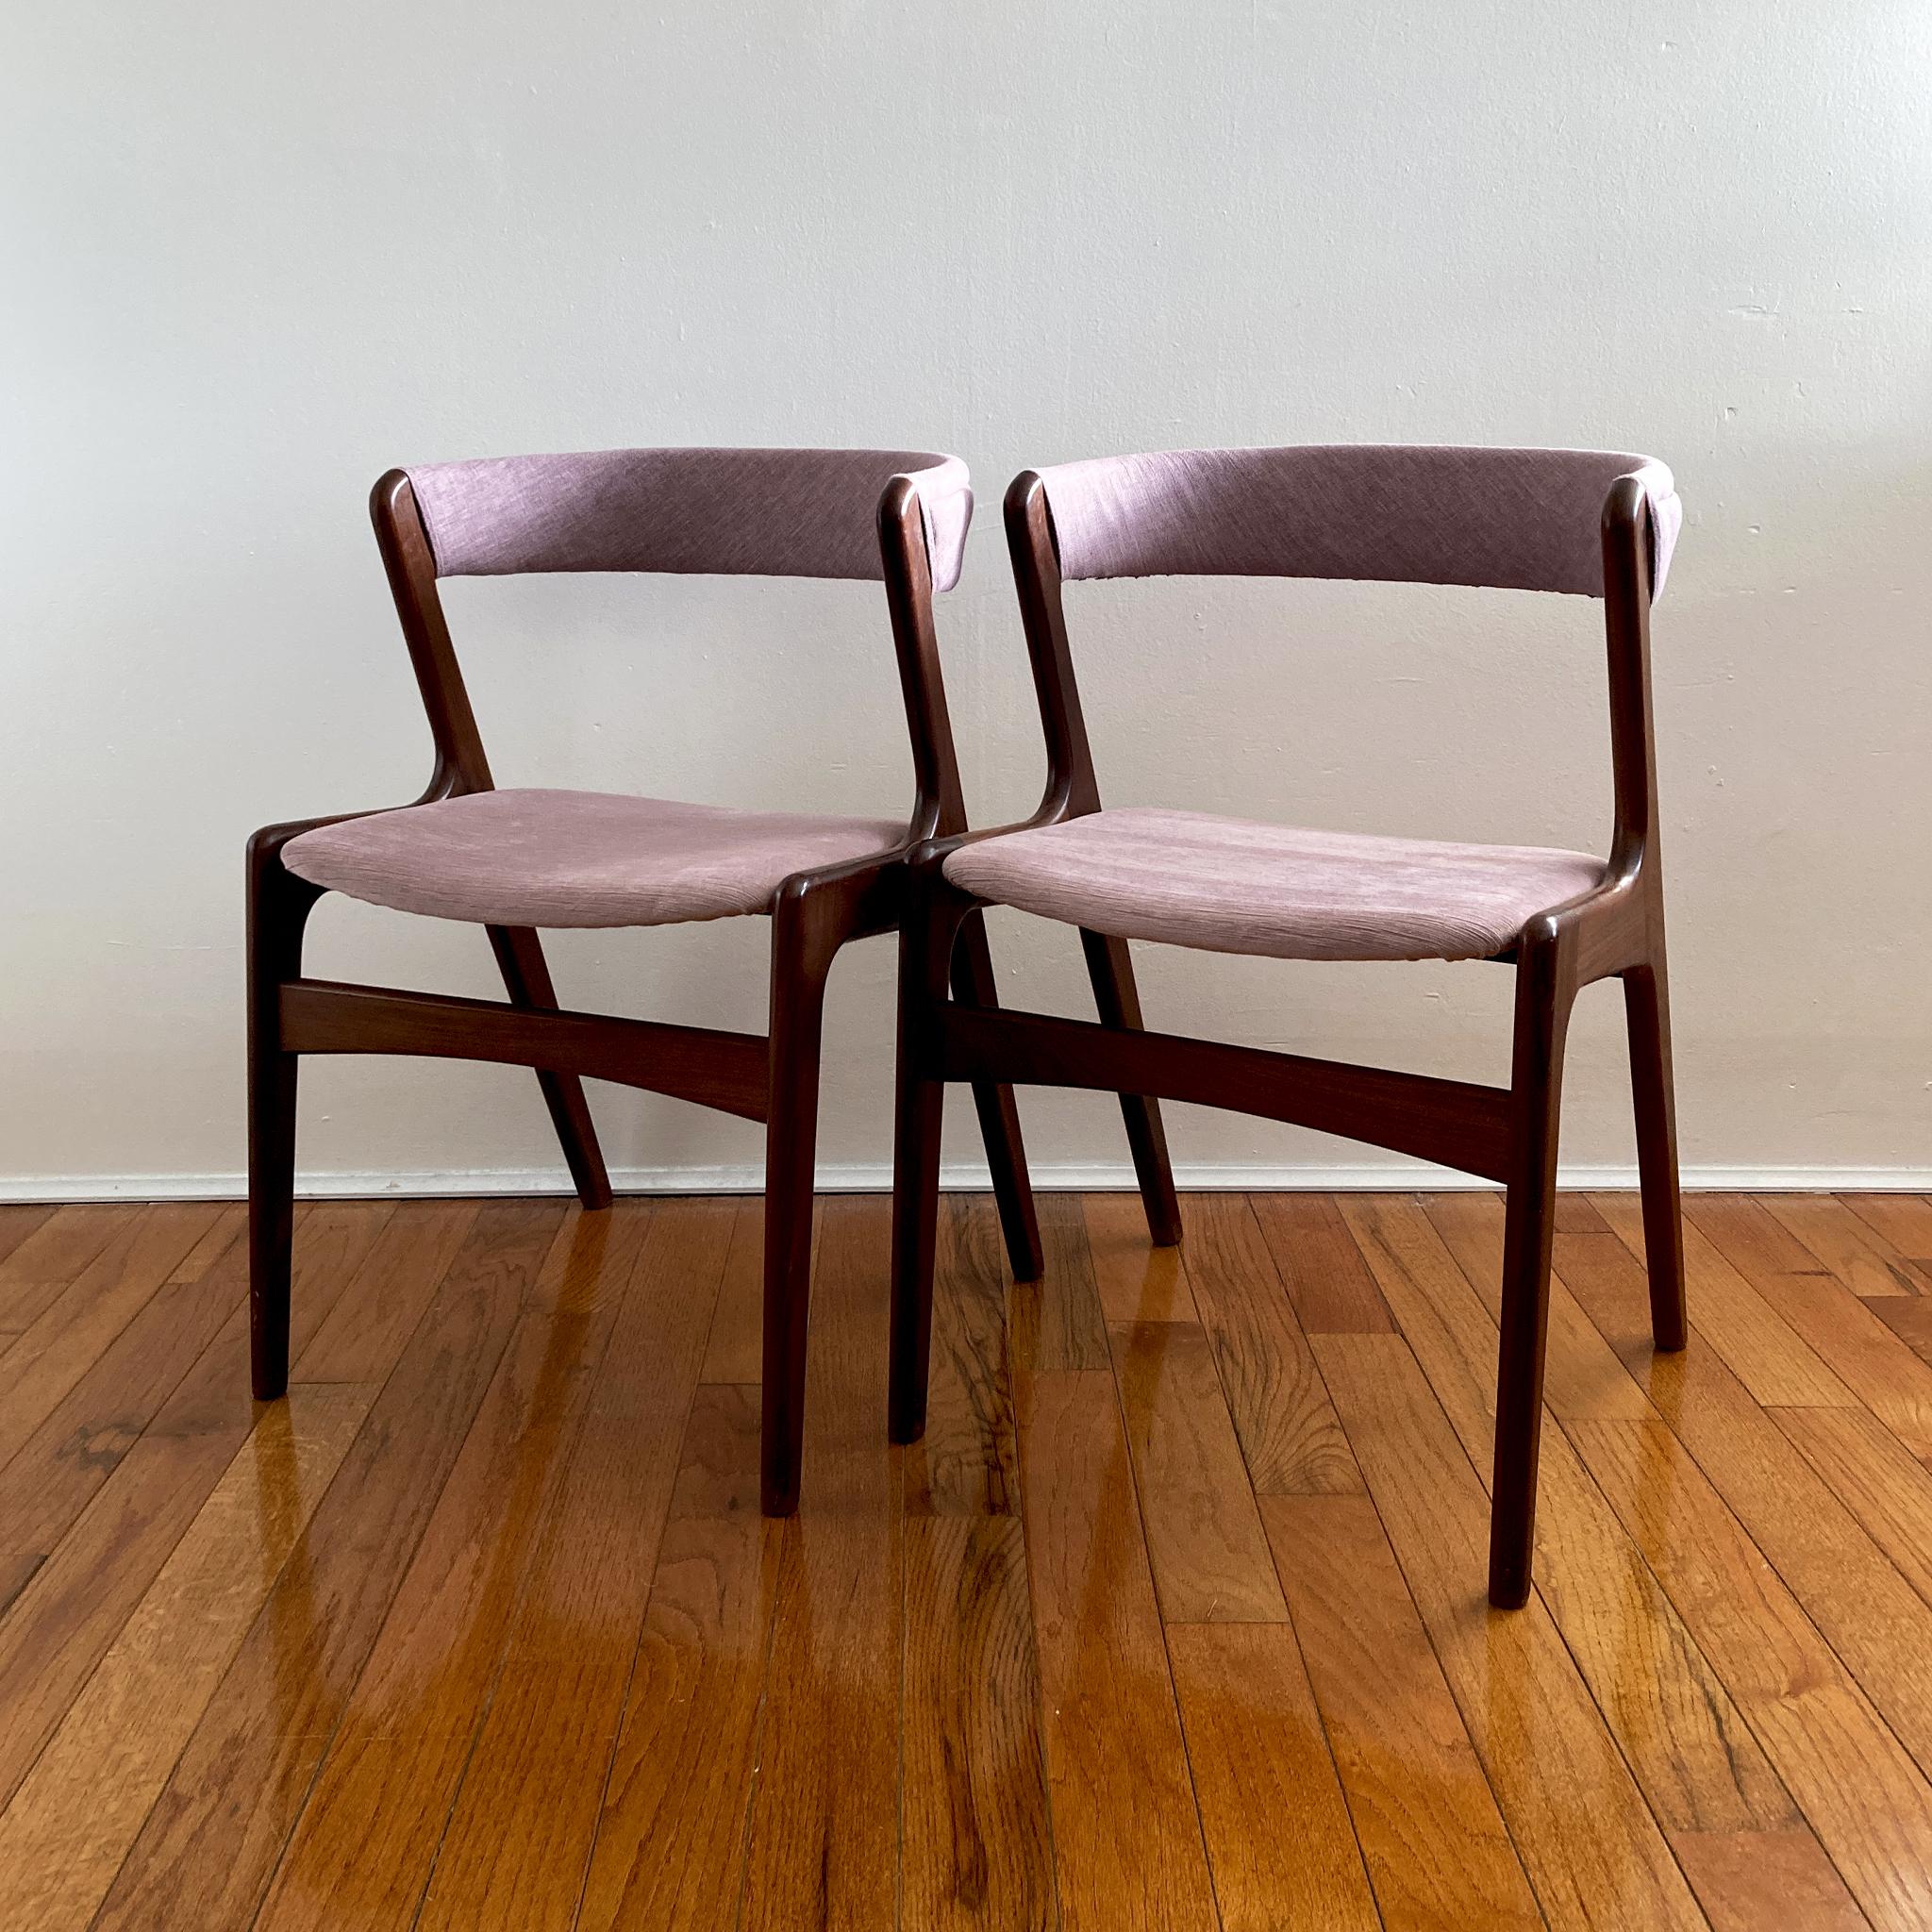 Kai Kristiansen Mauve Pink Curved Back Dining Side Chairs, 1960s, Pair of Two In Good Condition For Sale In New York, NY